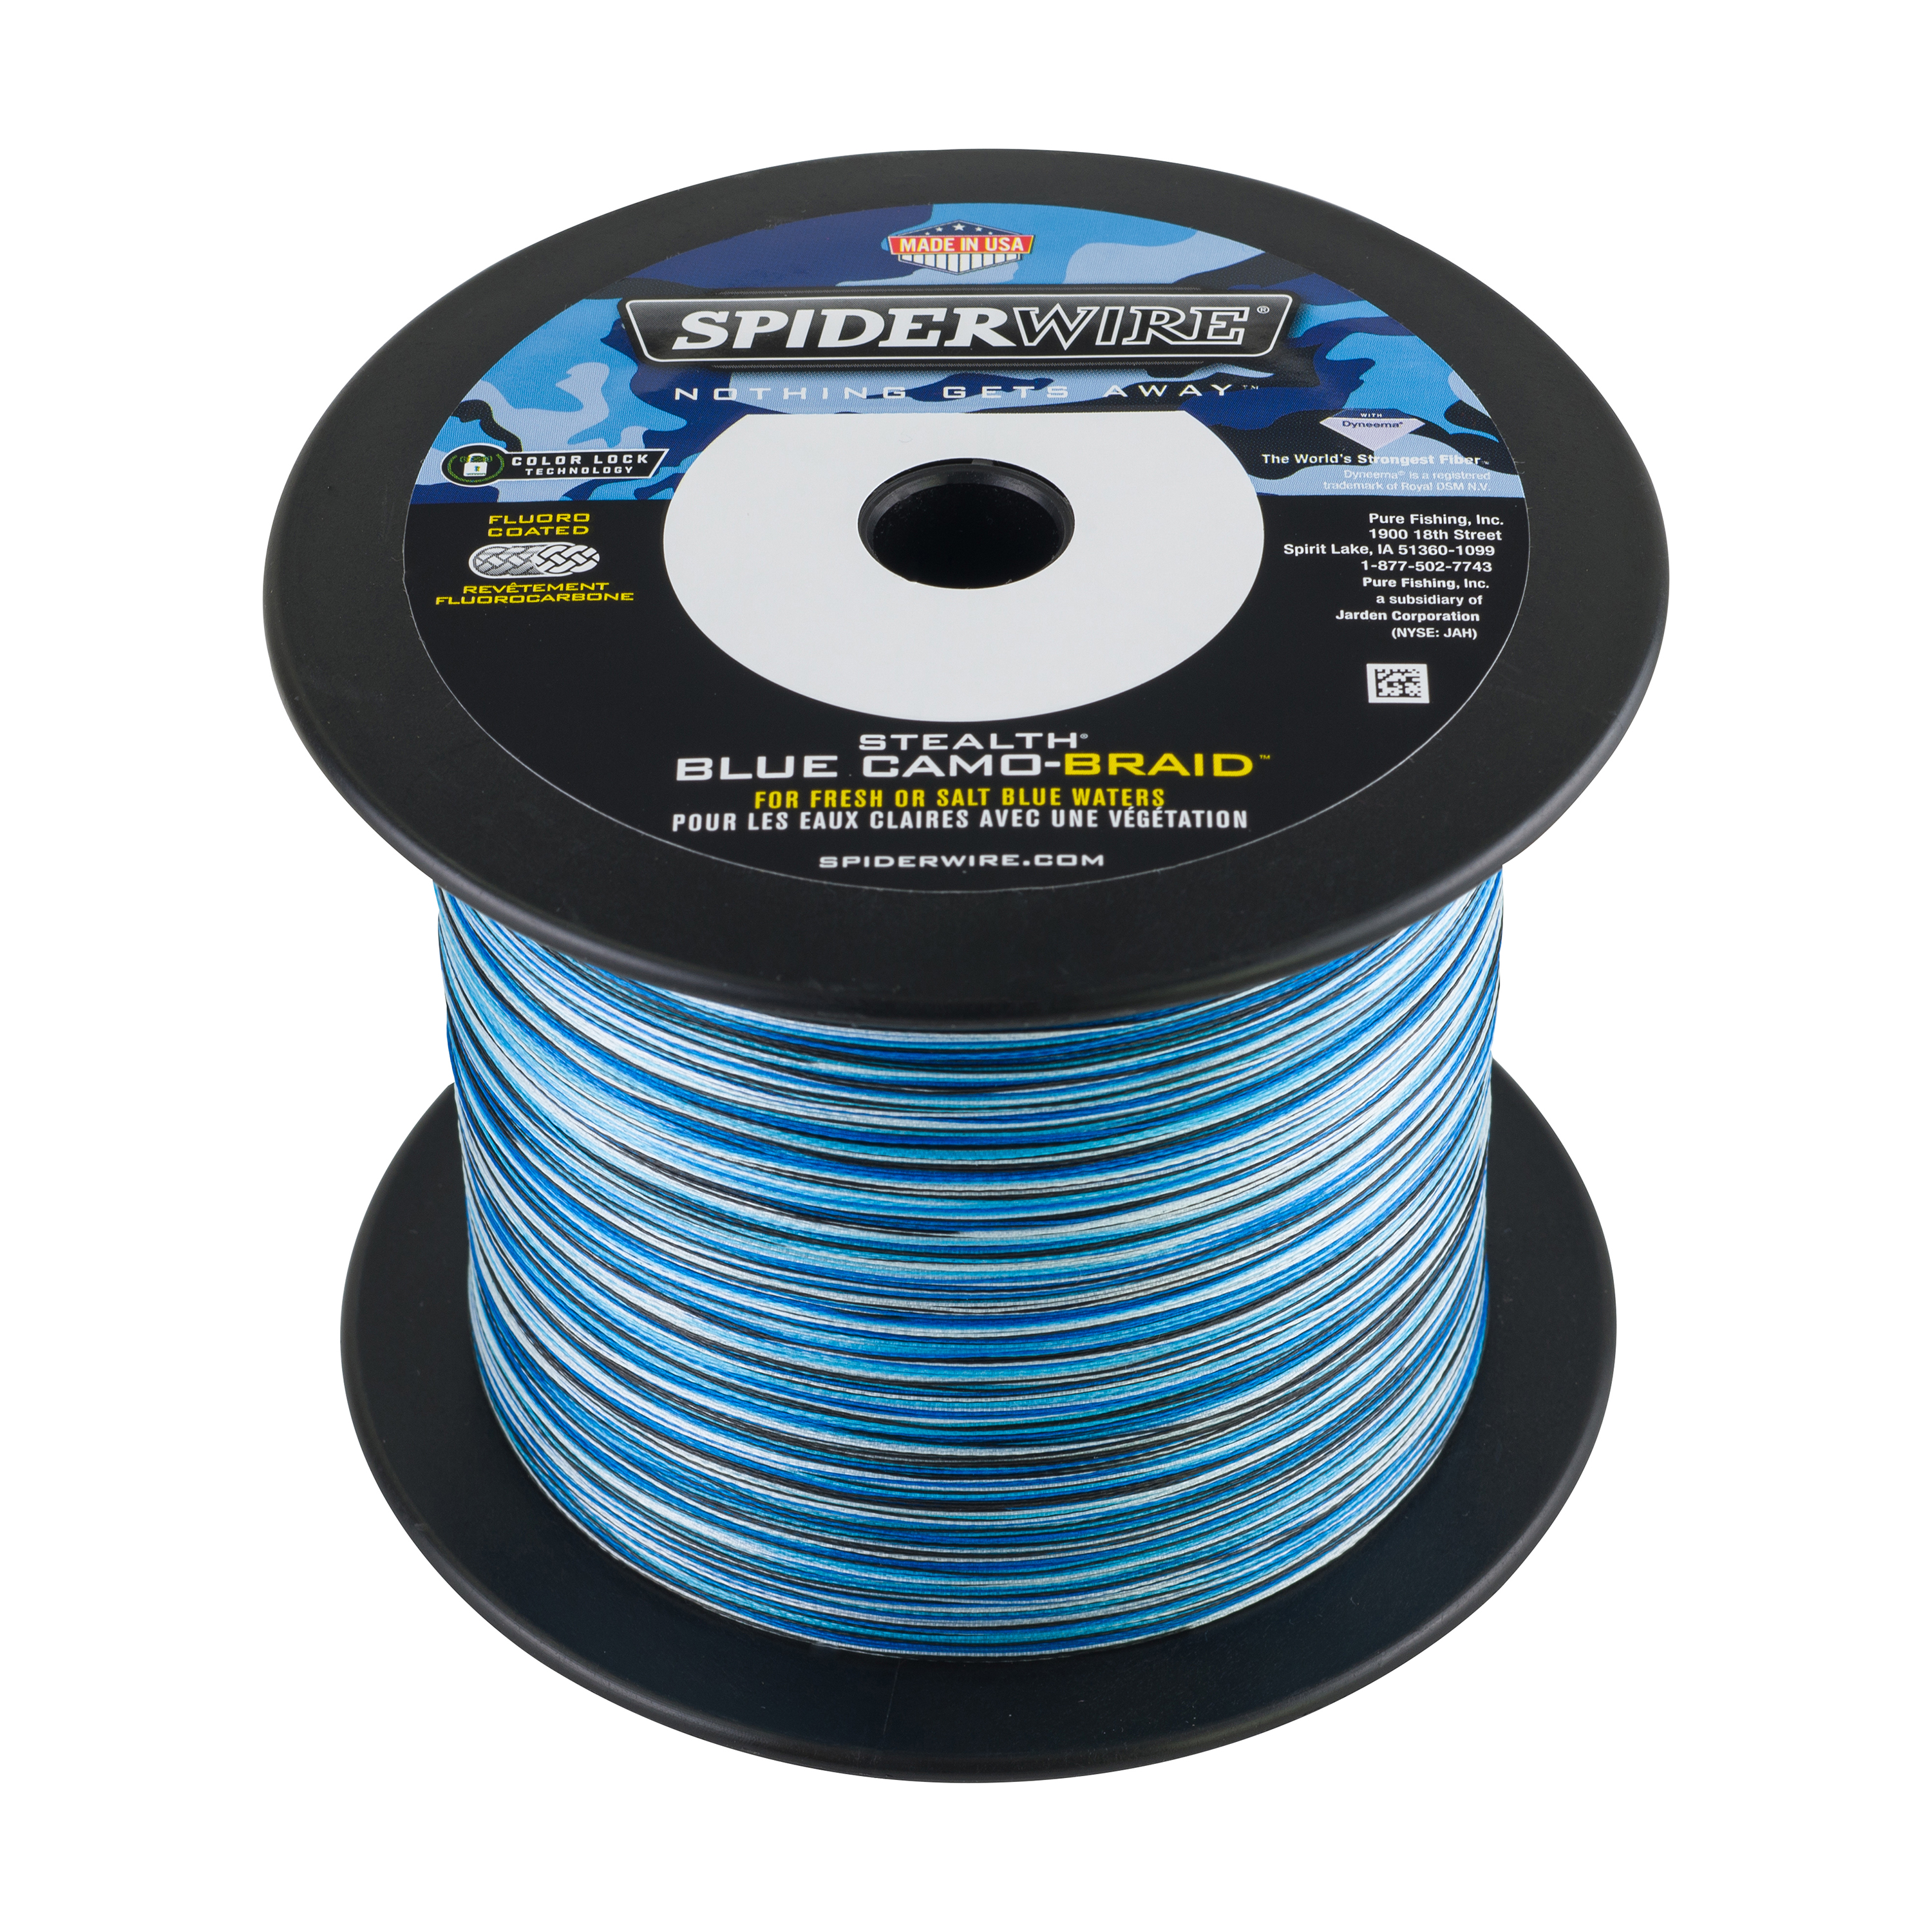 https://op1.0ps.us/original/opplanet-spiderwire-ss65bc-1500-stealth-camo-blue-65lb-1500yd-1370459